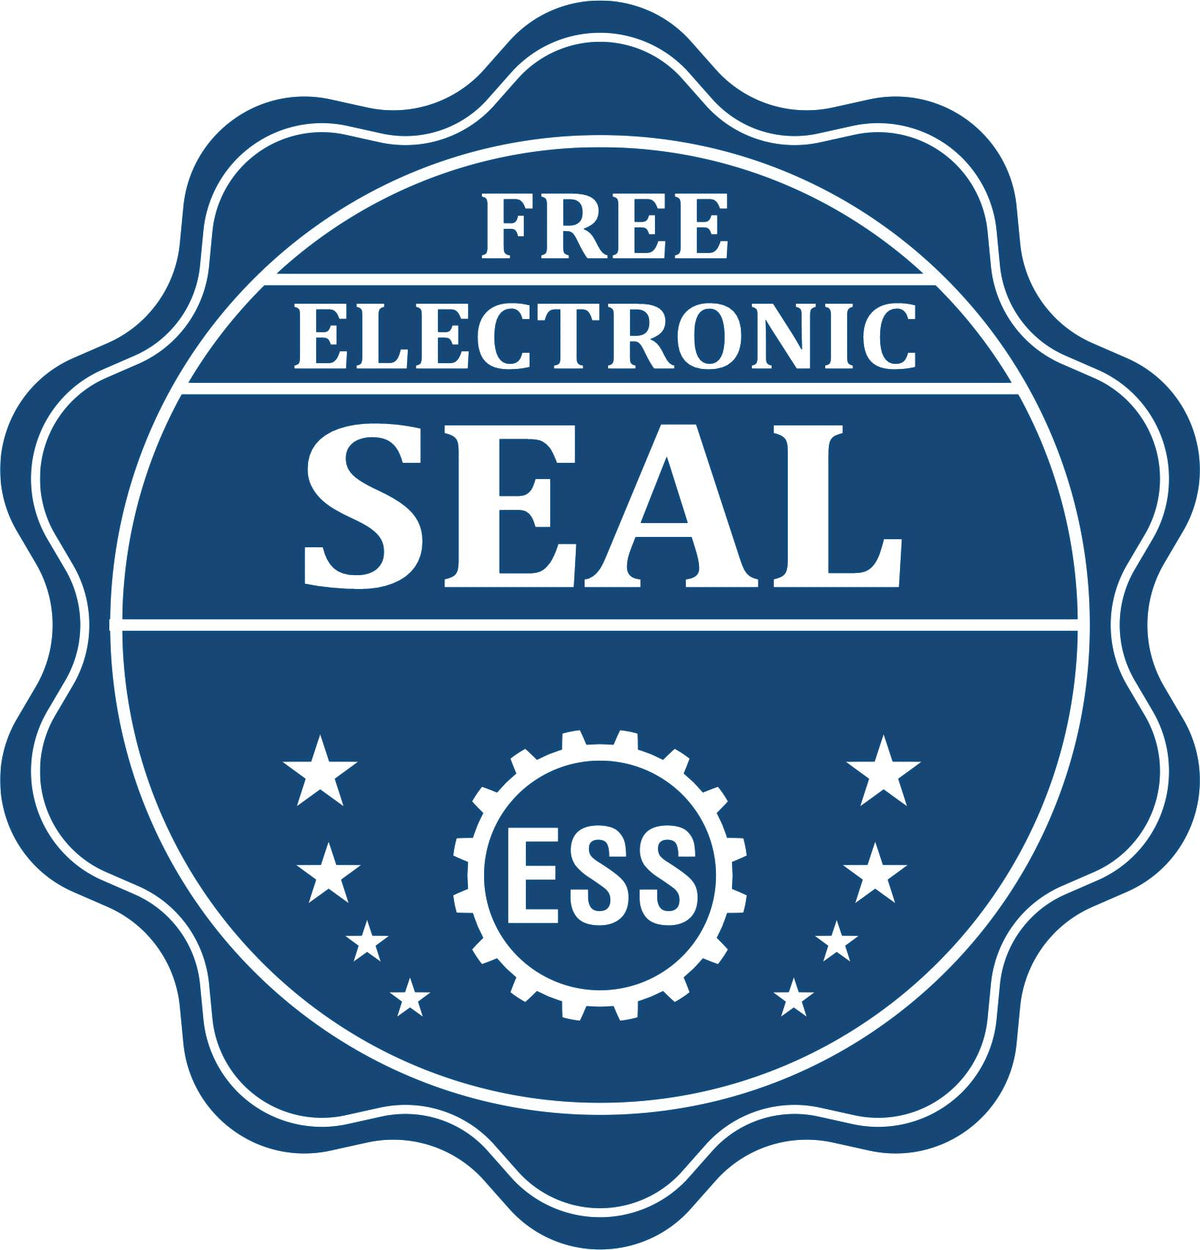 A badge showing a free electronic seal for the Slim Pre-Inked Texas Land Surveyor Seal Stamp with stars and the ESS gear on the emblem.